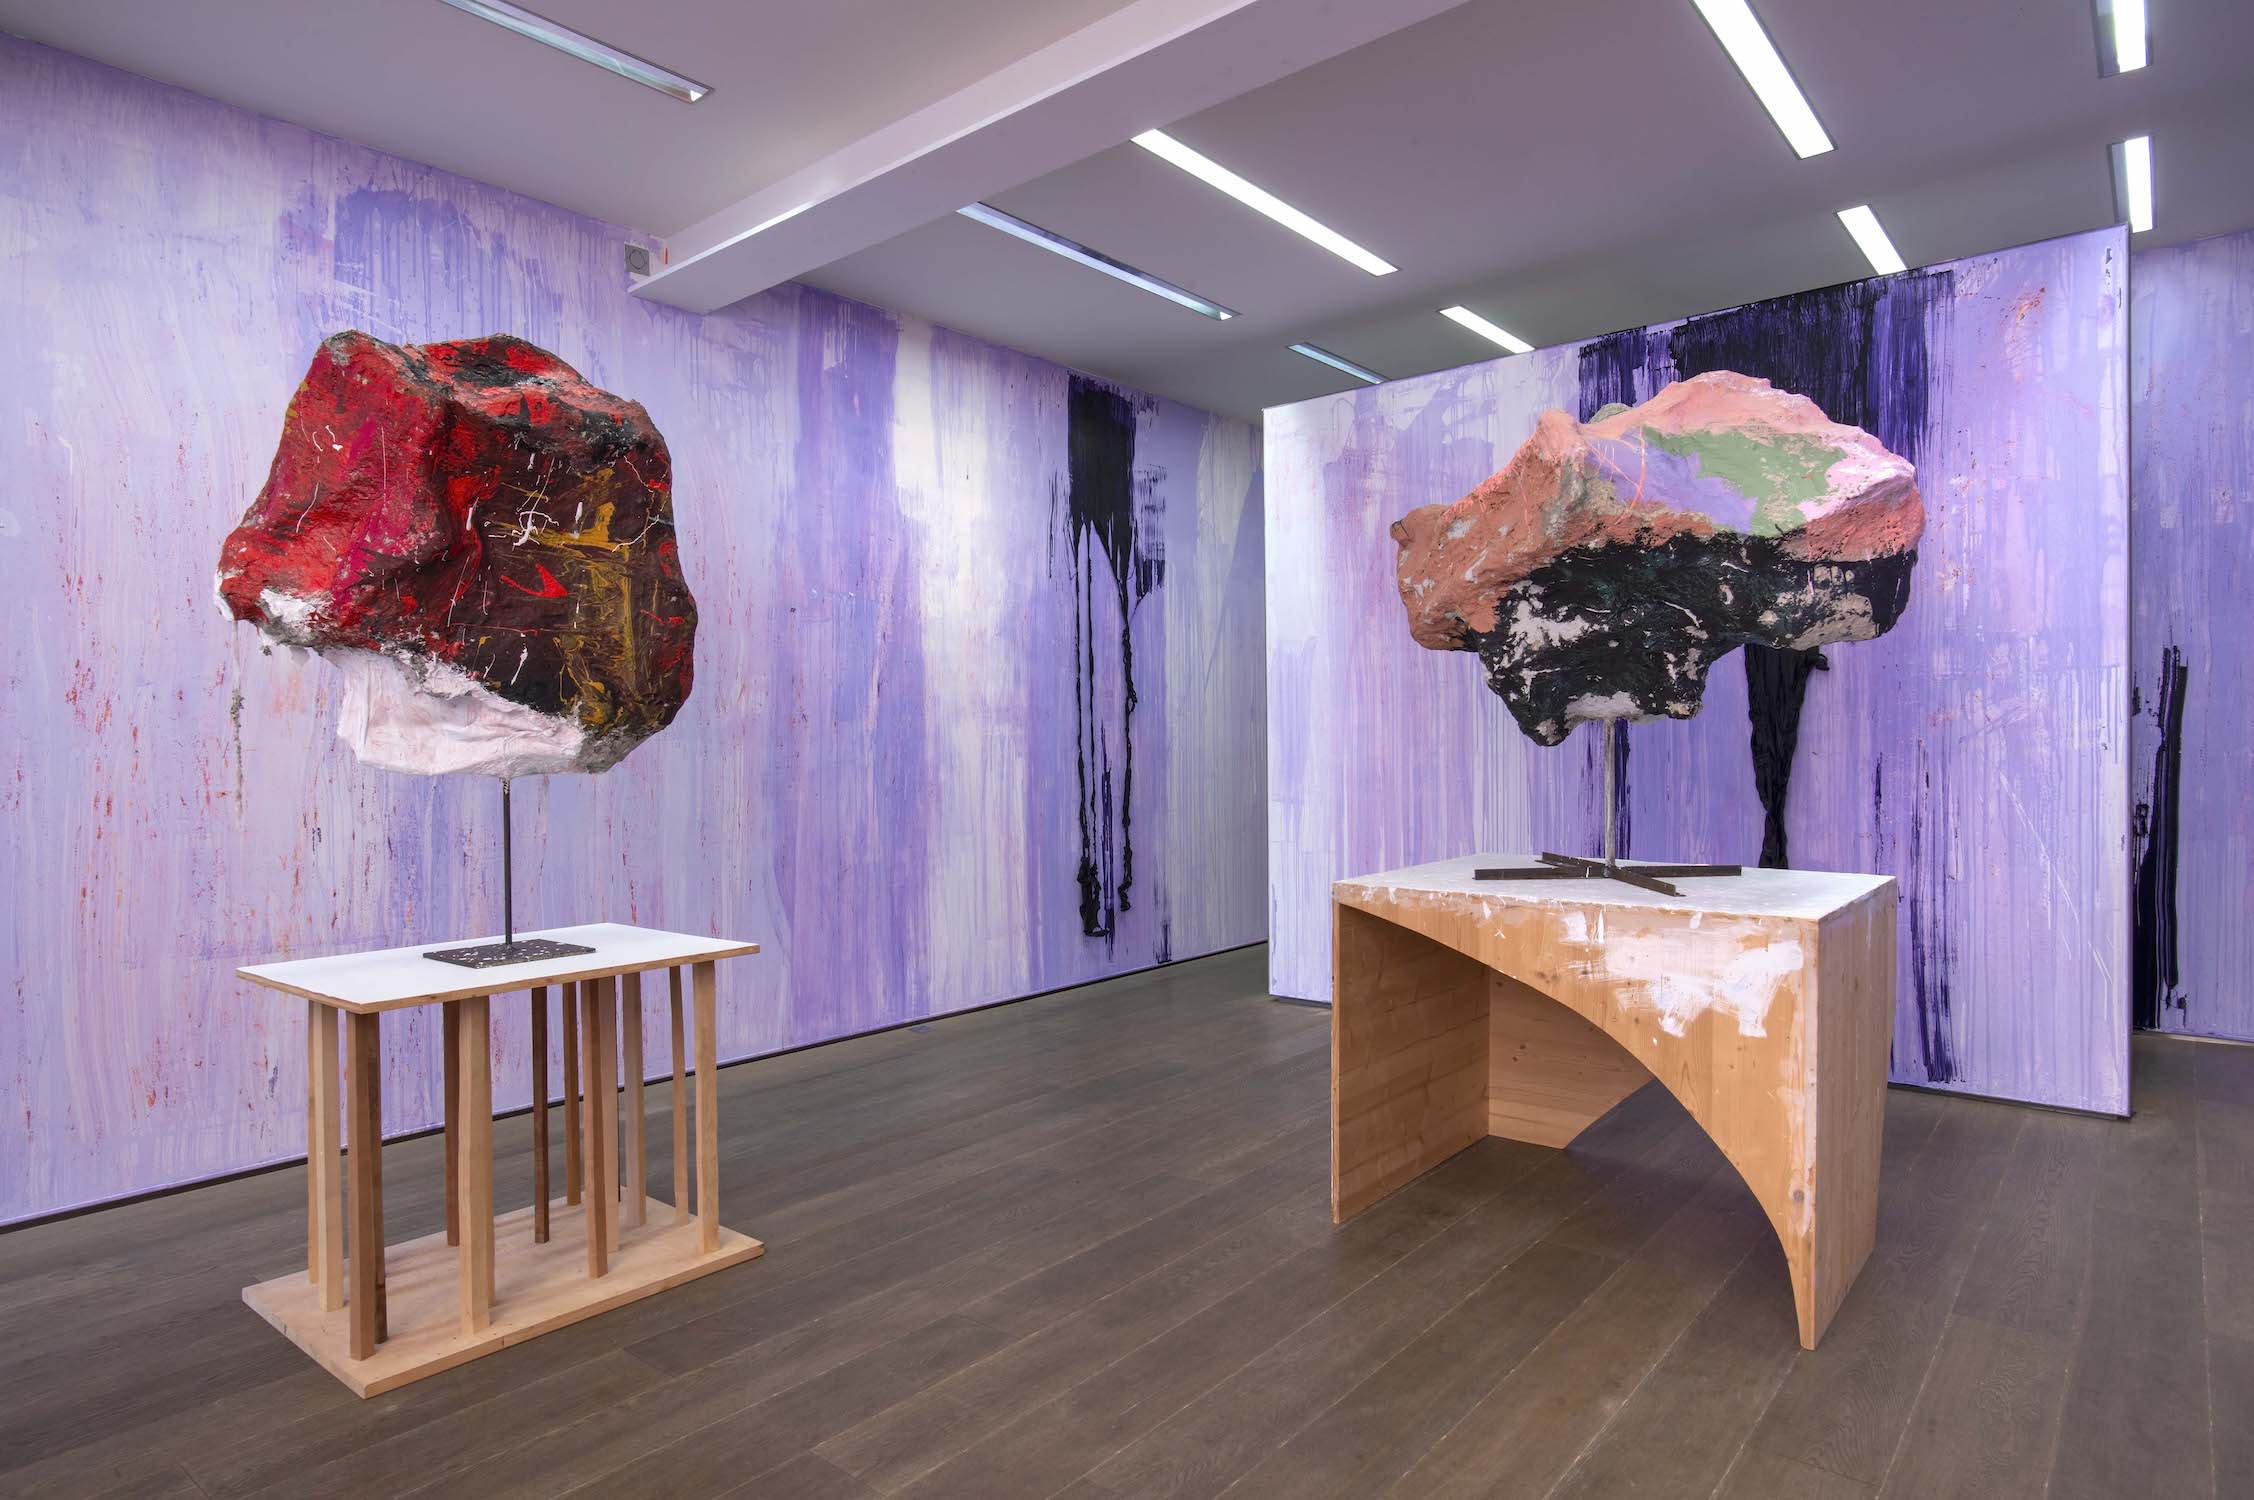 Installation view of 'West World' with Franz West and Thu Van Tran, 2019. Courtesy of Galerie Natalie Seroussi, Paris.